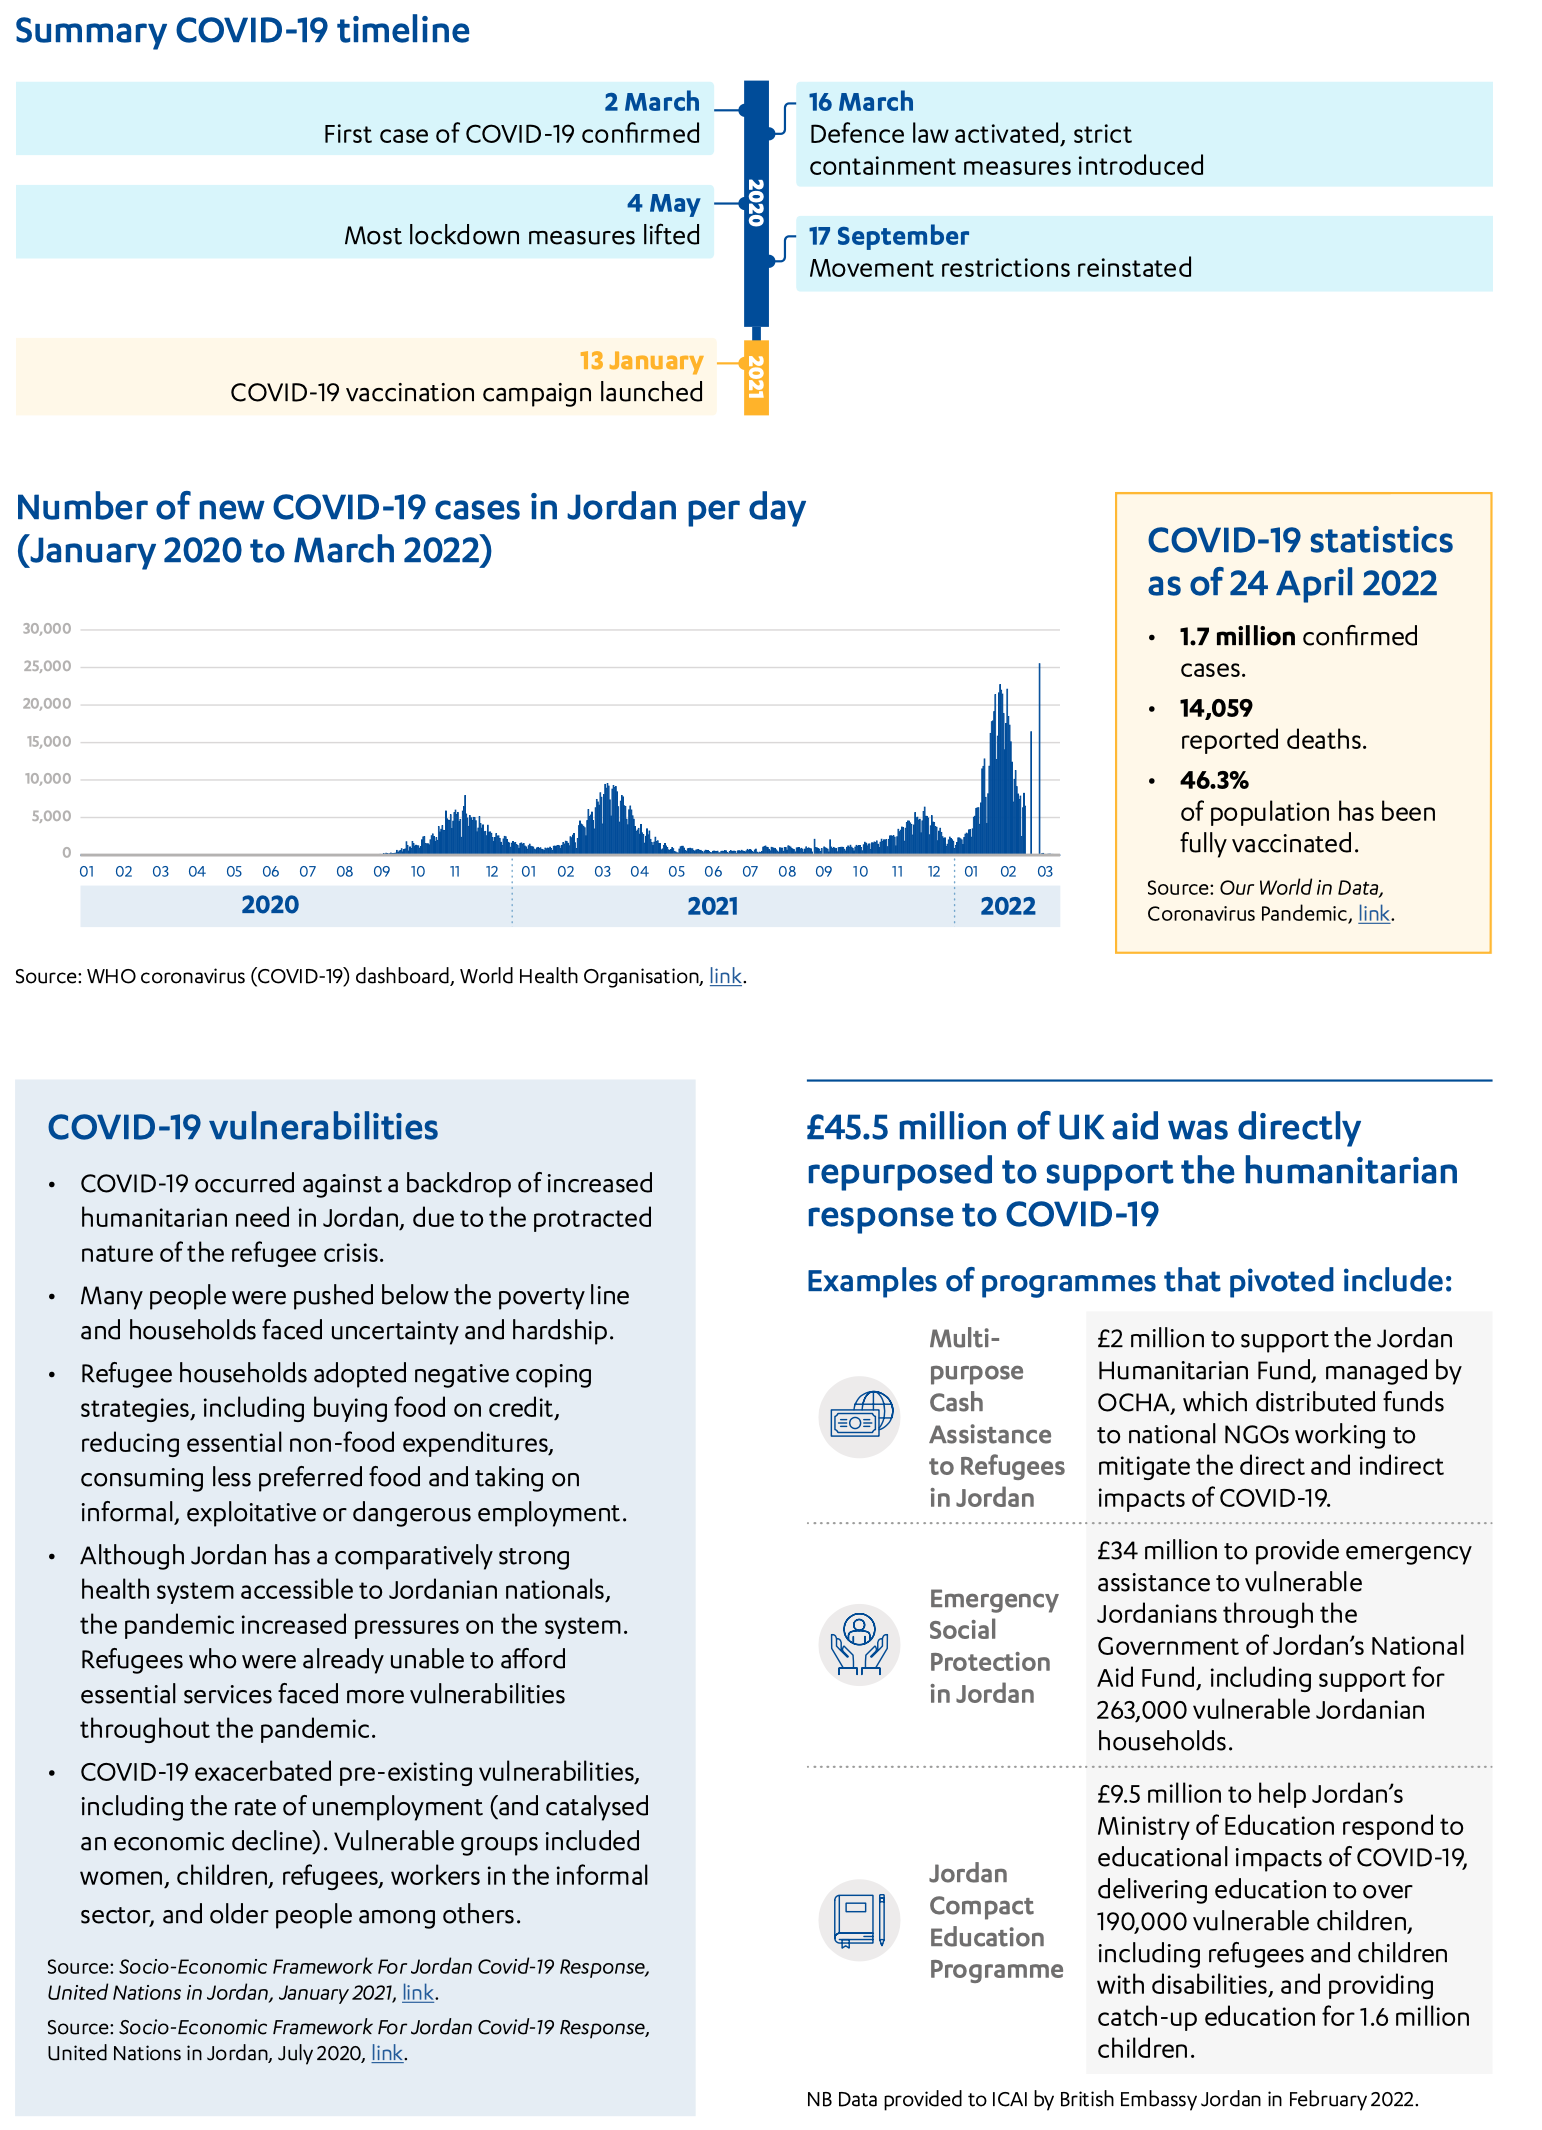 Jordan case study, including Summary COVID-19 timeline, COVID-19 statistics, COVID-19 vulnerabilities and examples of UK aid repurposed to support the humanitarian response to COVID-19